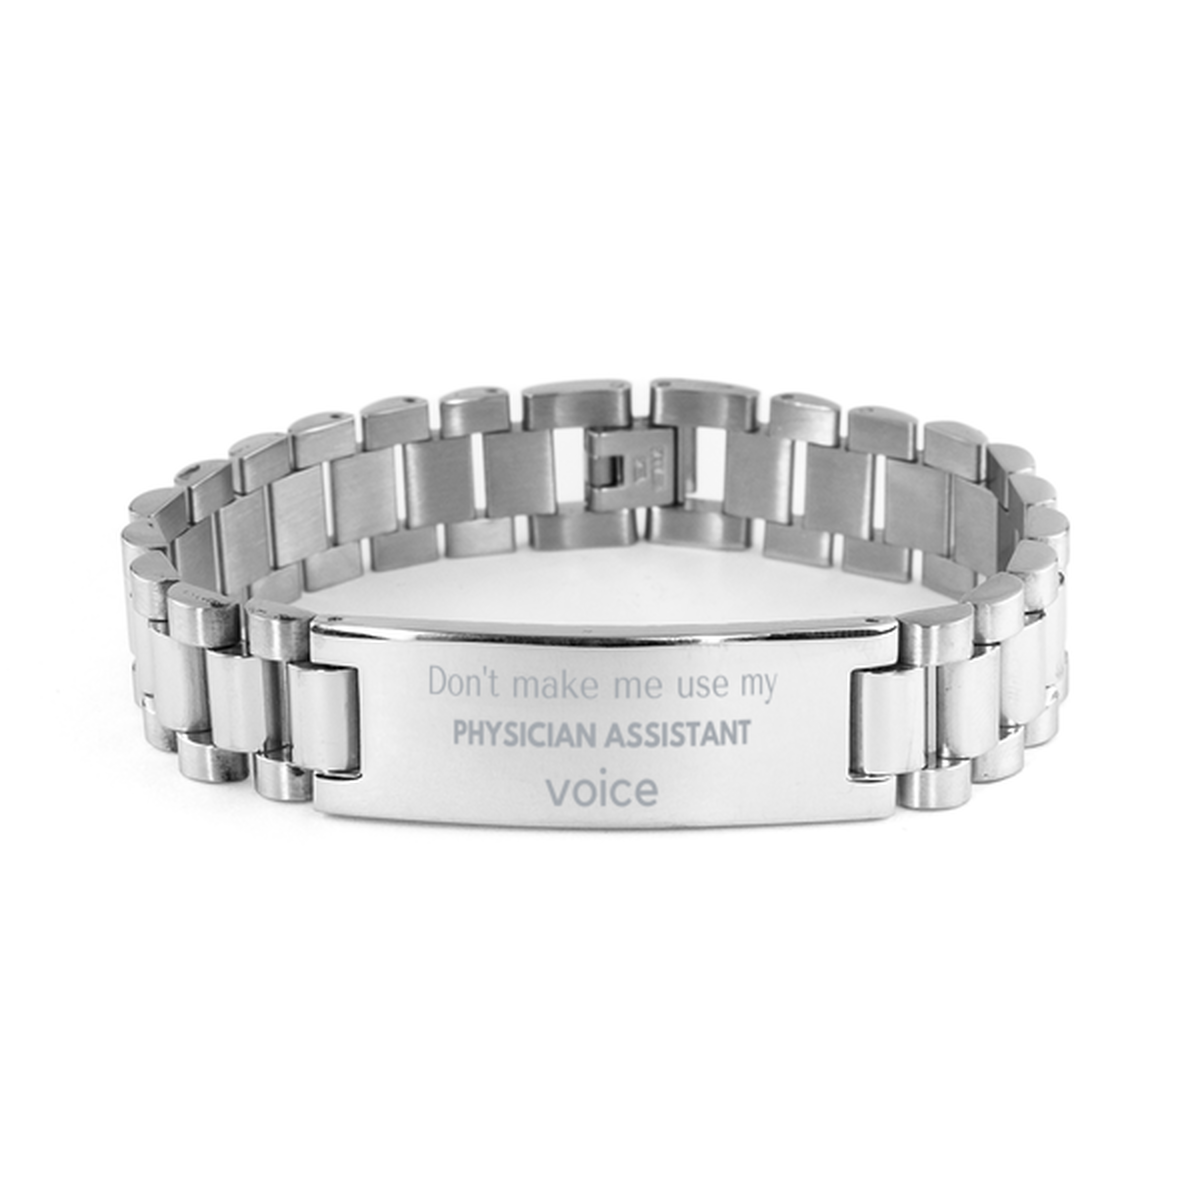 Don't make me use my Physician Assistant voice, Sarcasm Physician Assistant Gifts, Christmas Physician Assistant Ladder Stainless Steel Bracelet Birthday Unique Gifts For Physician Assistant Coworkers, Men, Women, Colleague, Friends